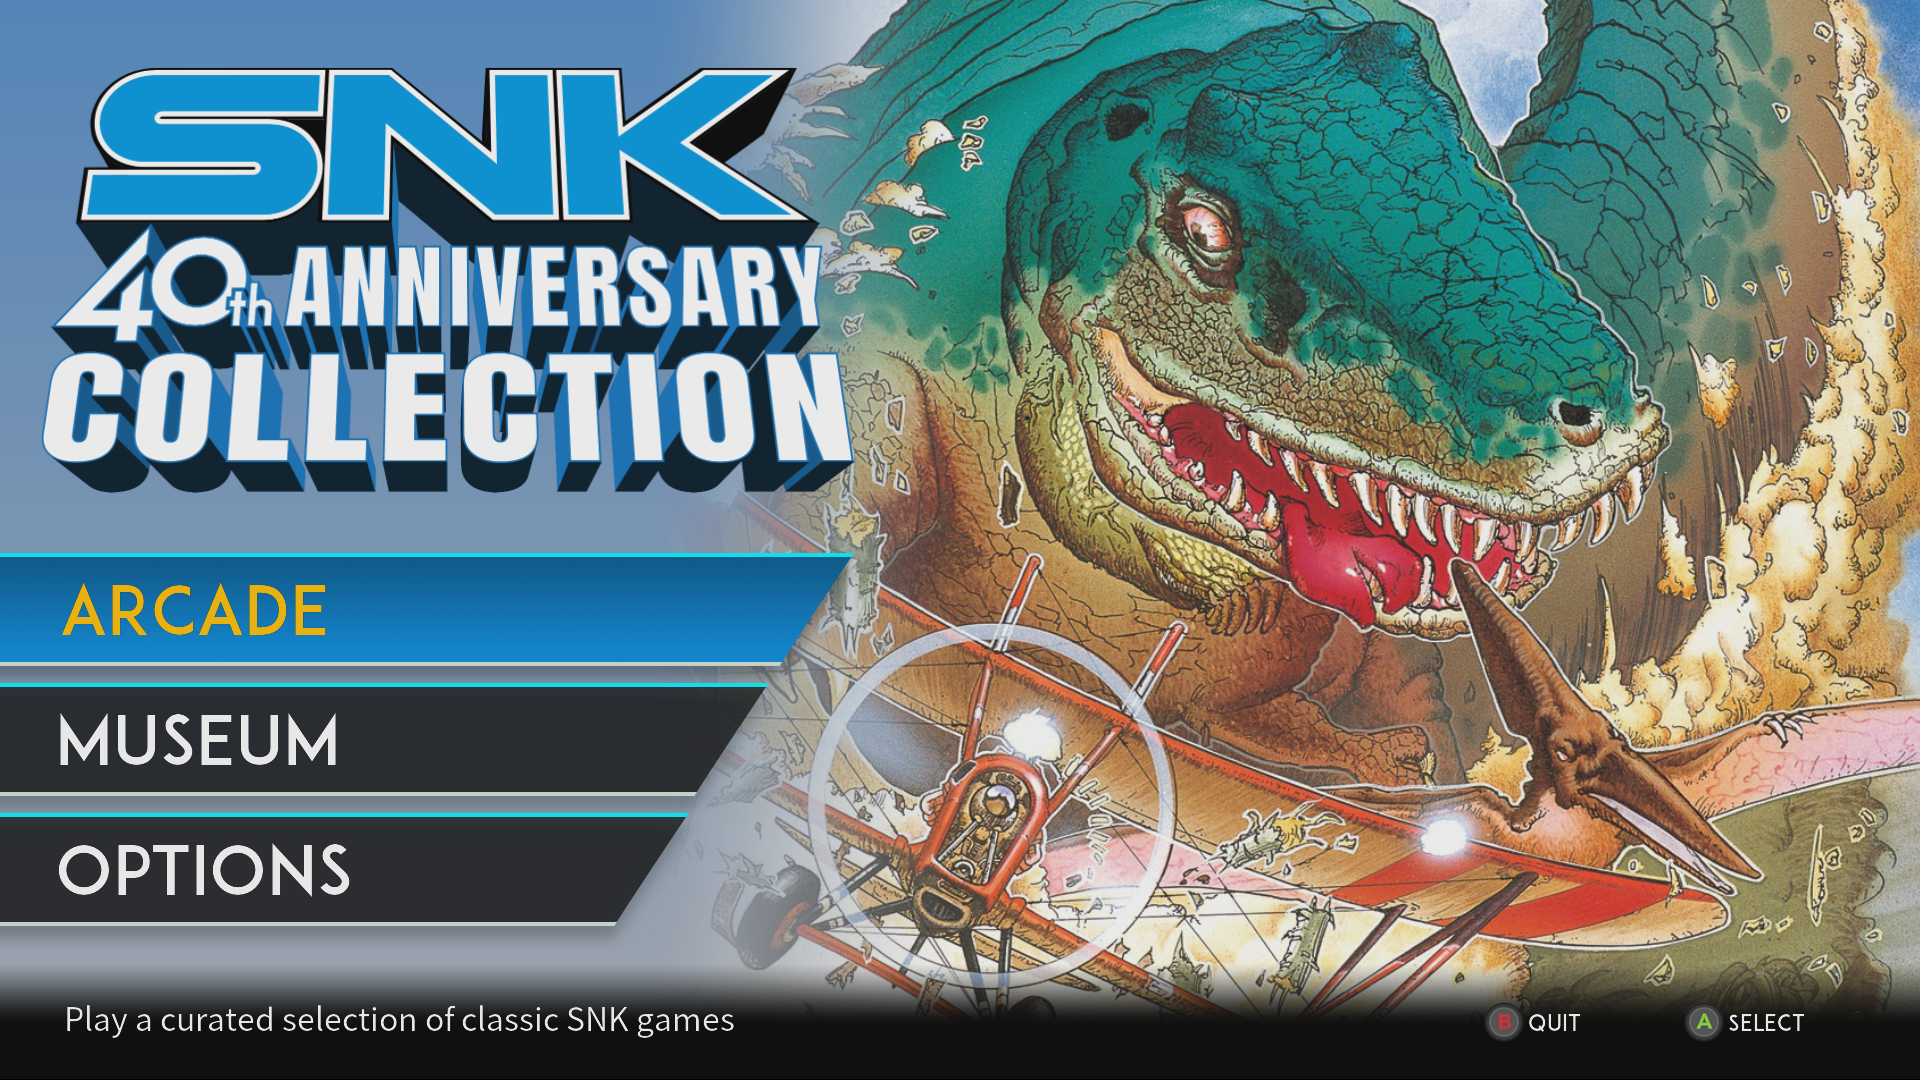 SNK 40th Anniversary Collection for XBOX ONE